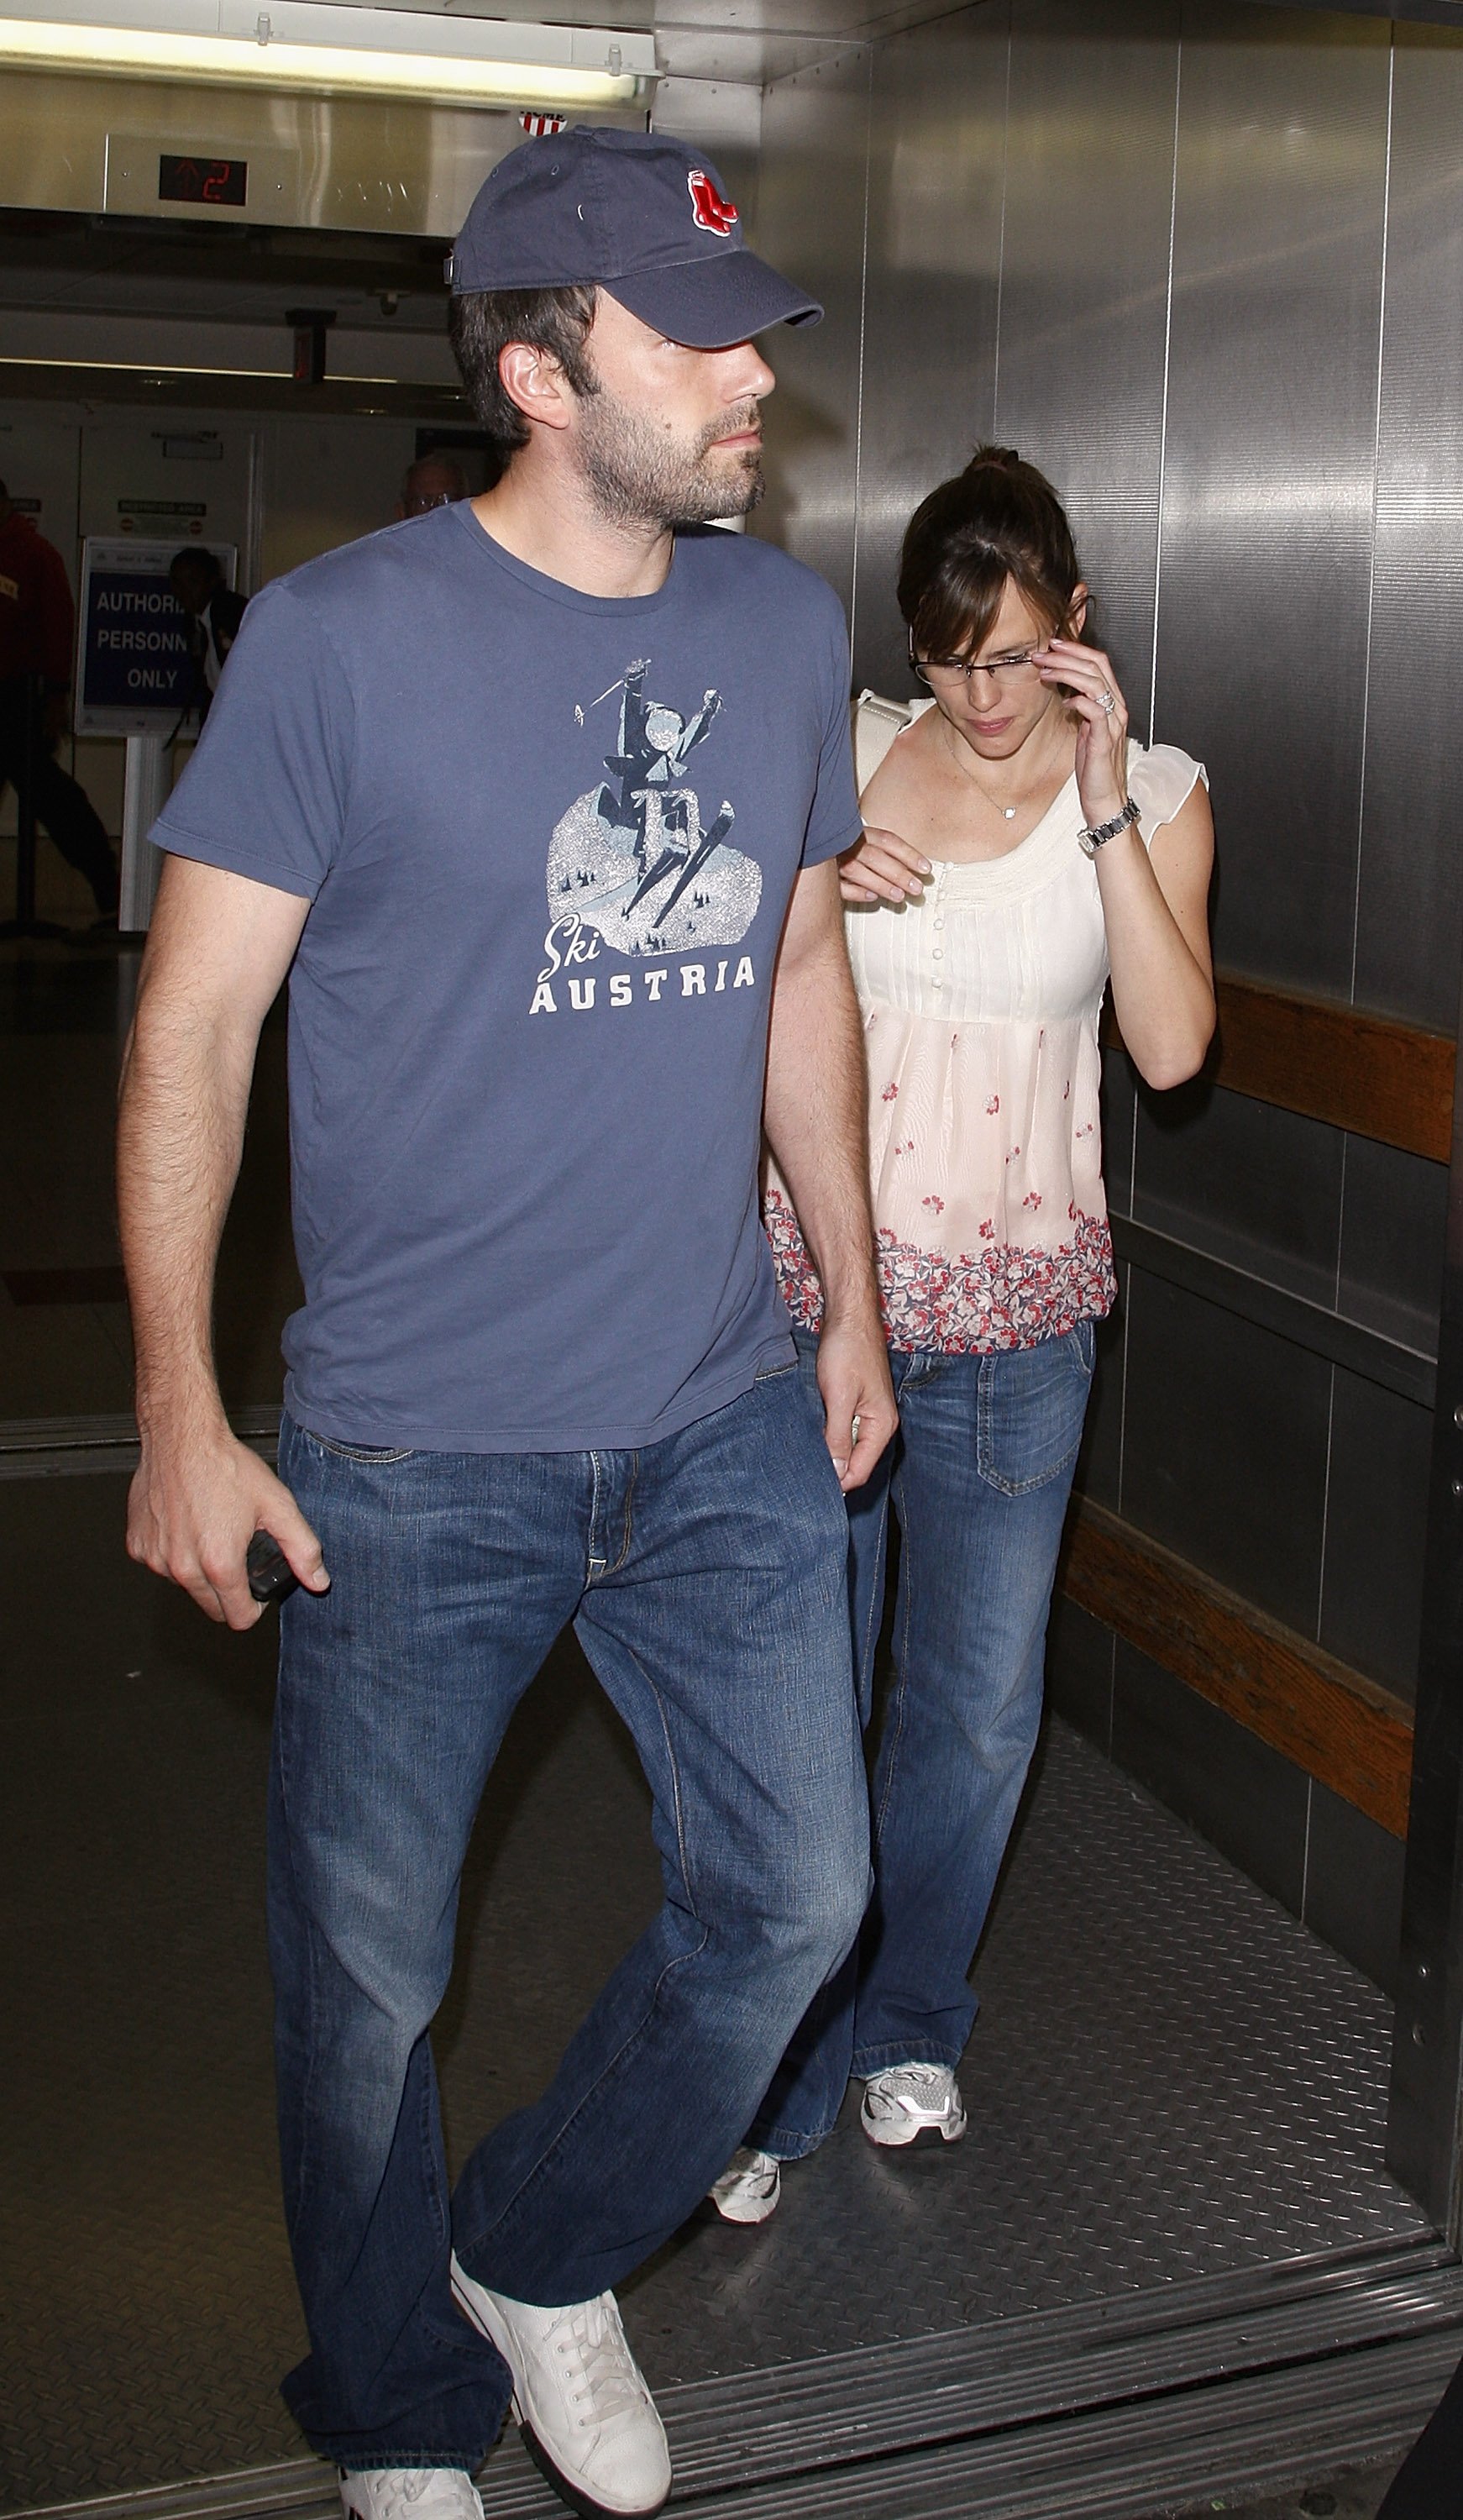 Ben Affleck and Jennifer Garner arriving at LAX airport on August 3, 2008 in Los Angeles, California | Source: Getty Images